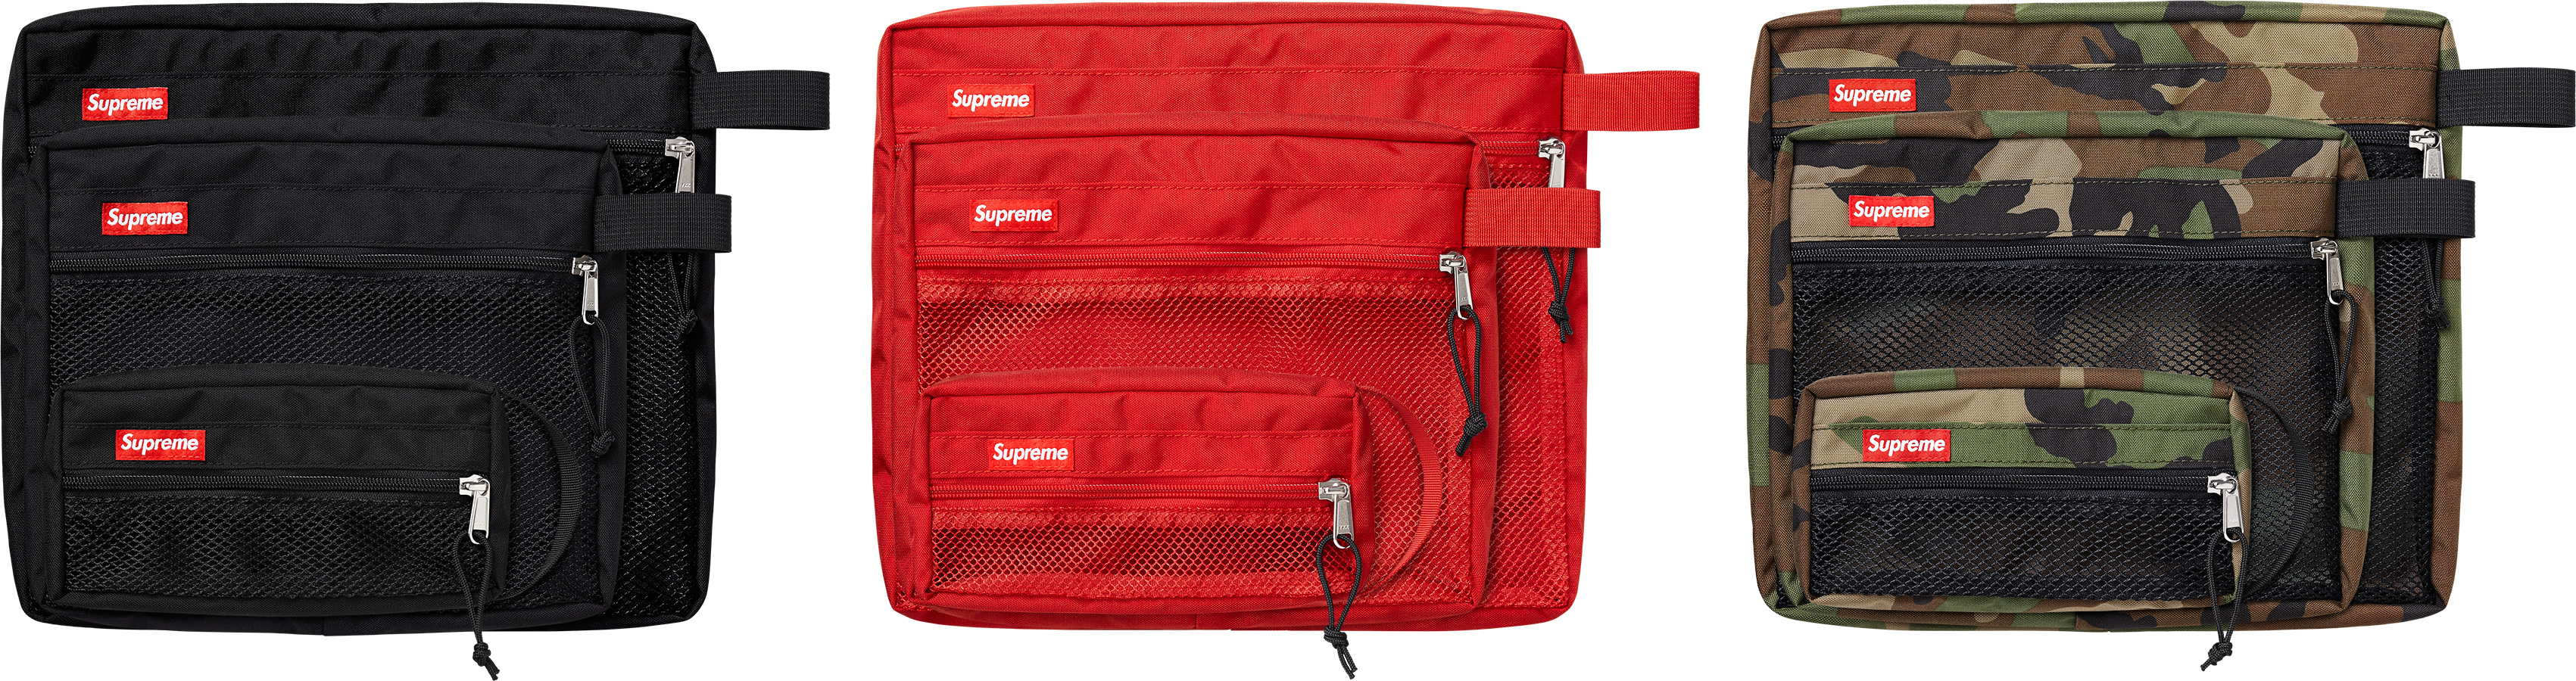 DropsByJay on X: Supreme Mesh Bags These 4 different mesh bags are set to  release in store and online this Thursday, May 18th. Mesh Mini Duffle Bag,  Mesh Small Backpack, Mesh Duffle